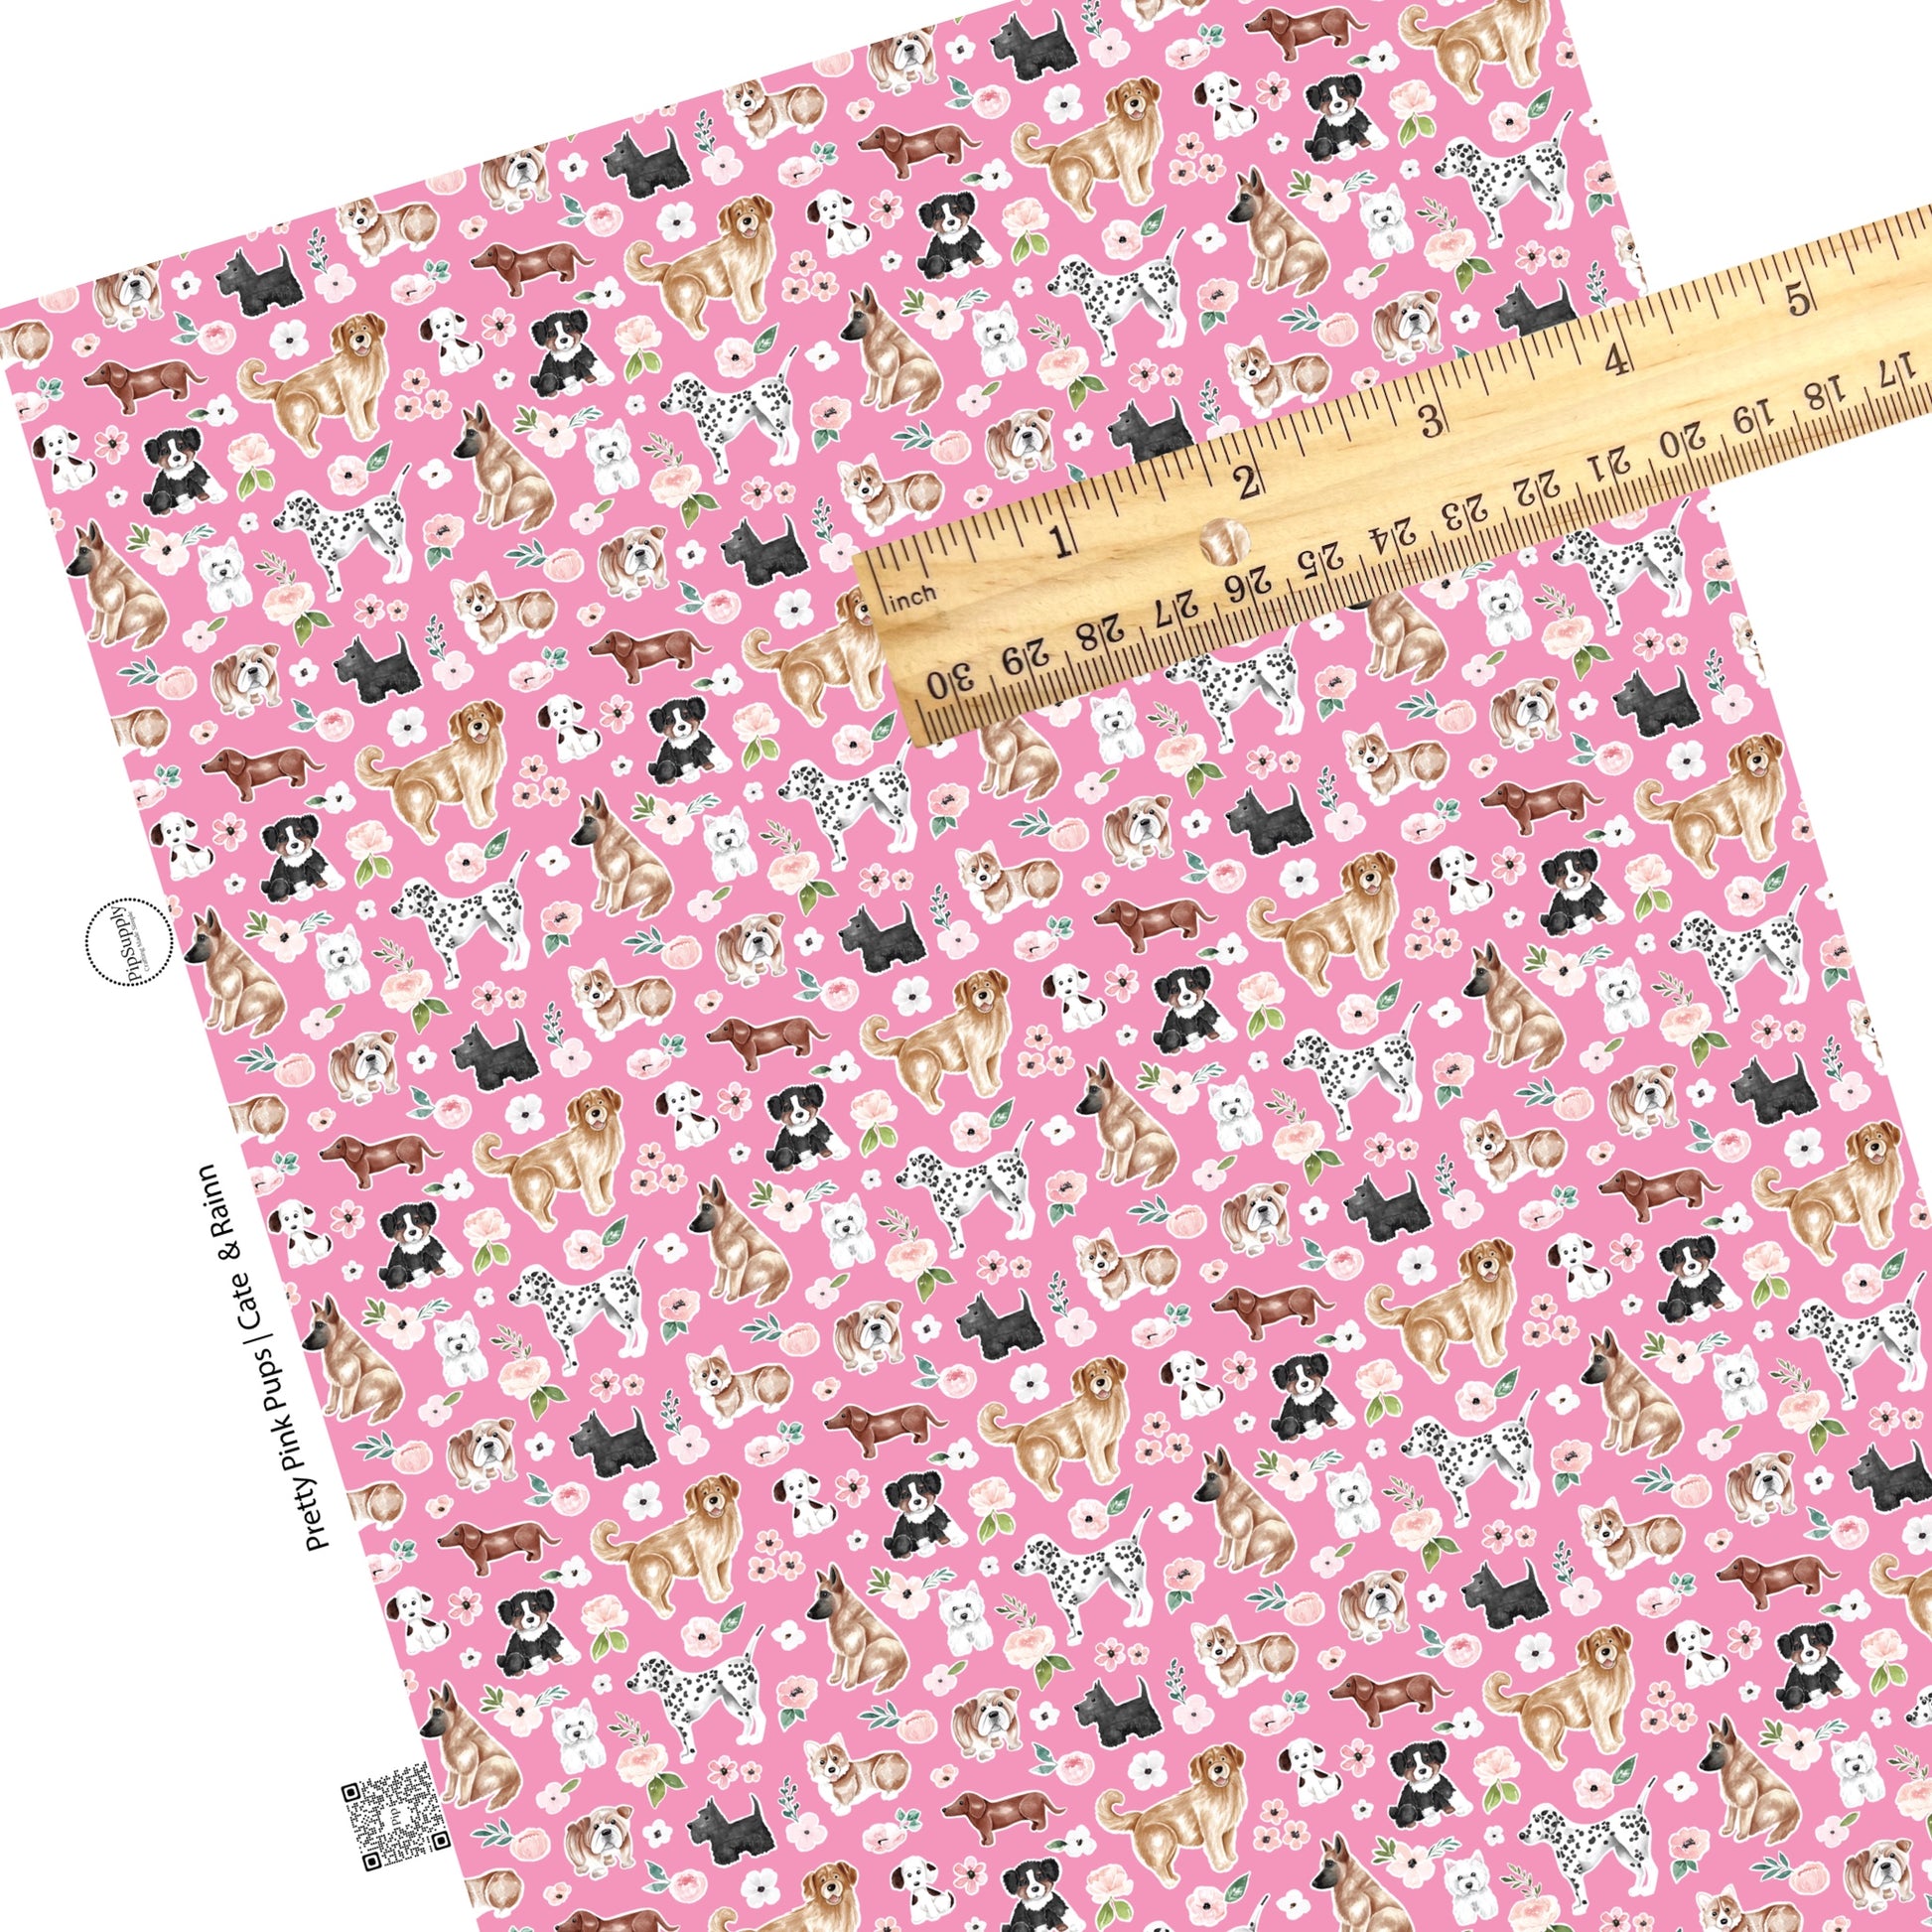 Pink dog faux leather sheets. Pink floral pattern faux leather sheets.